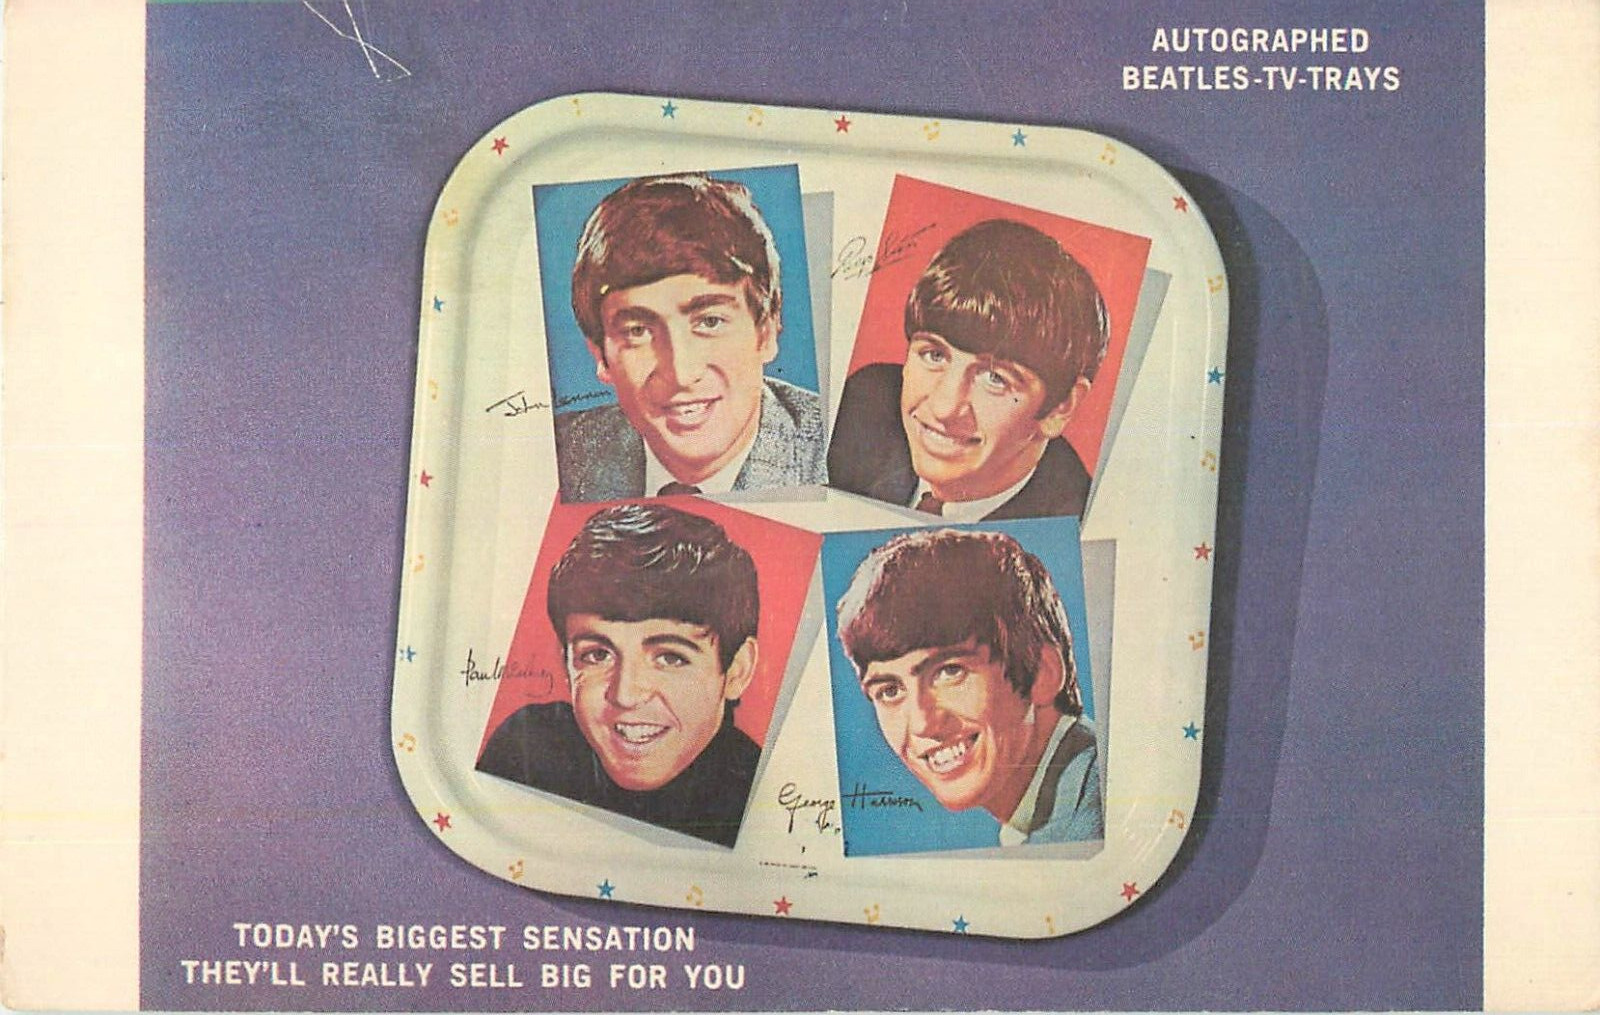 Extremely Scarce 1964 Beatles Tray Wholesale Promotional Vintage Postcard